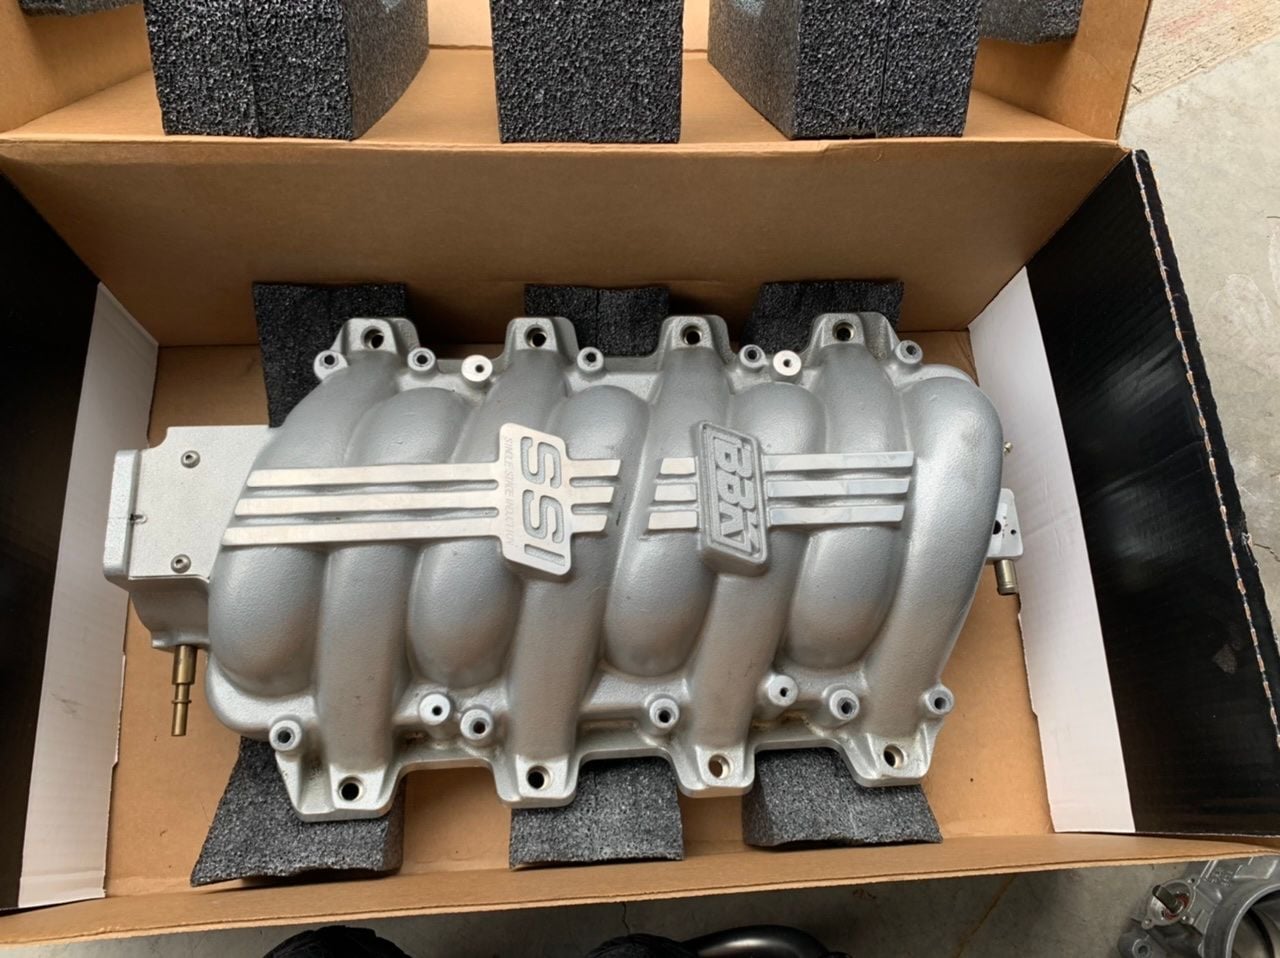 Engine - Intake/Fuel - BBK intake Manifold aluminum LS1 LS6 LS2 cathedral port heads - Used - 1997 to 2008 Chevrolet Corvette - Gainesville, VA 20155, United States